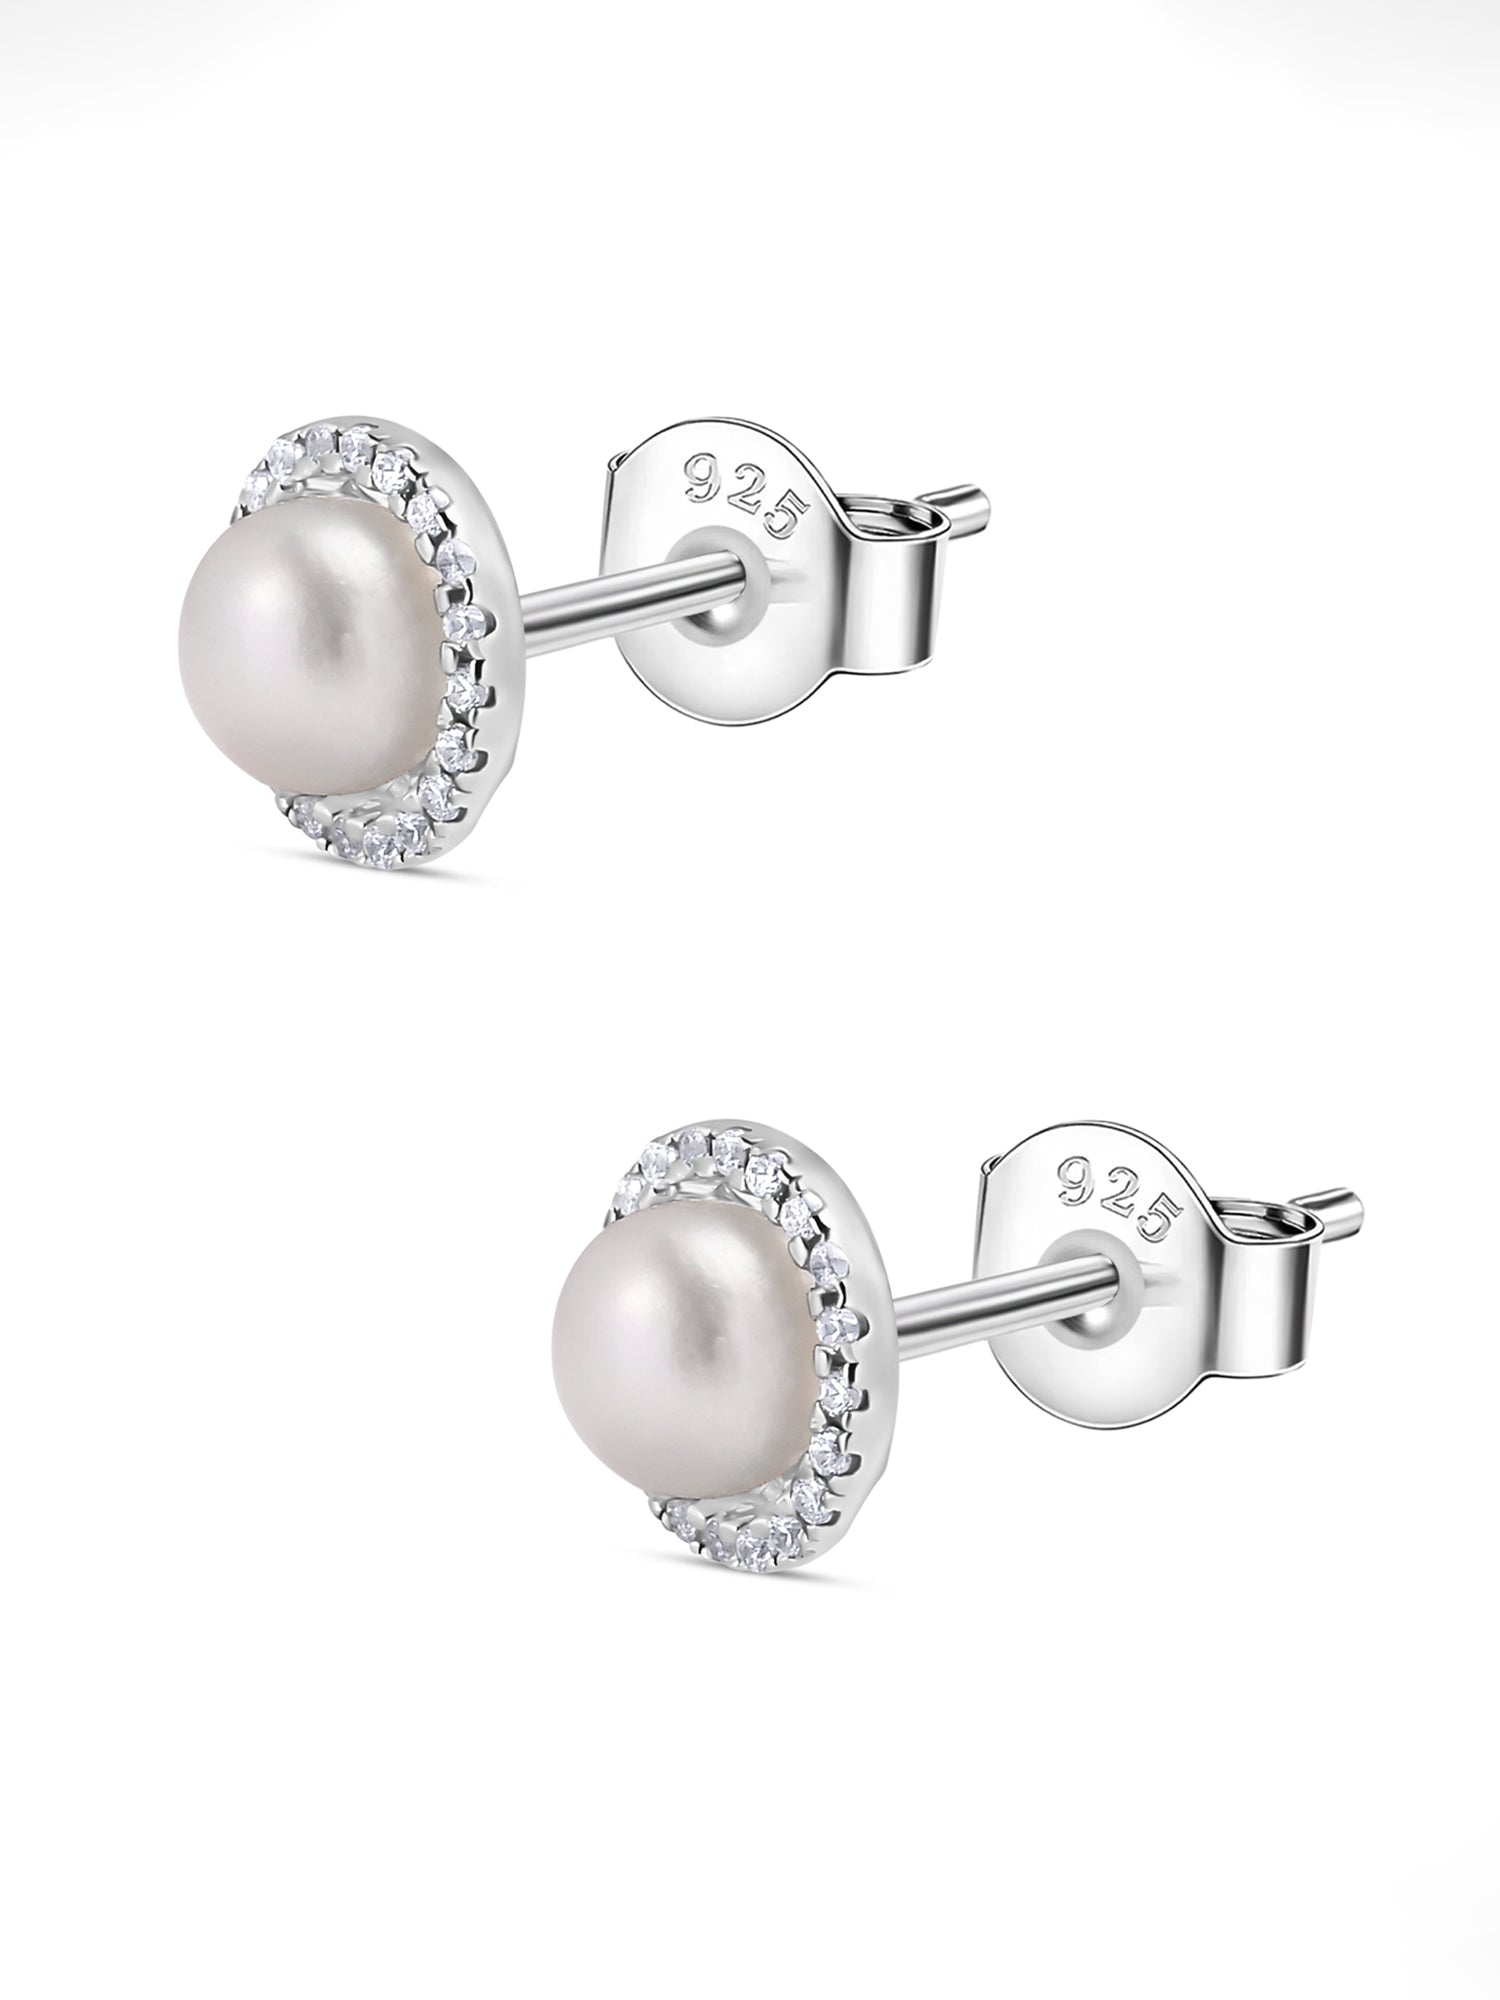 Classic Pearl Stud Earrings For Everyday-4